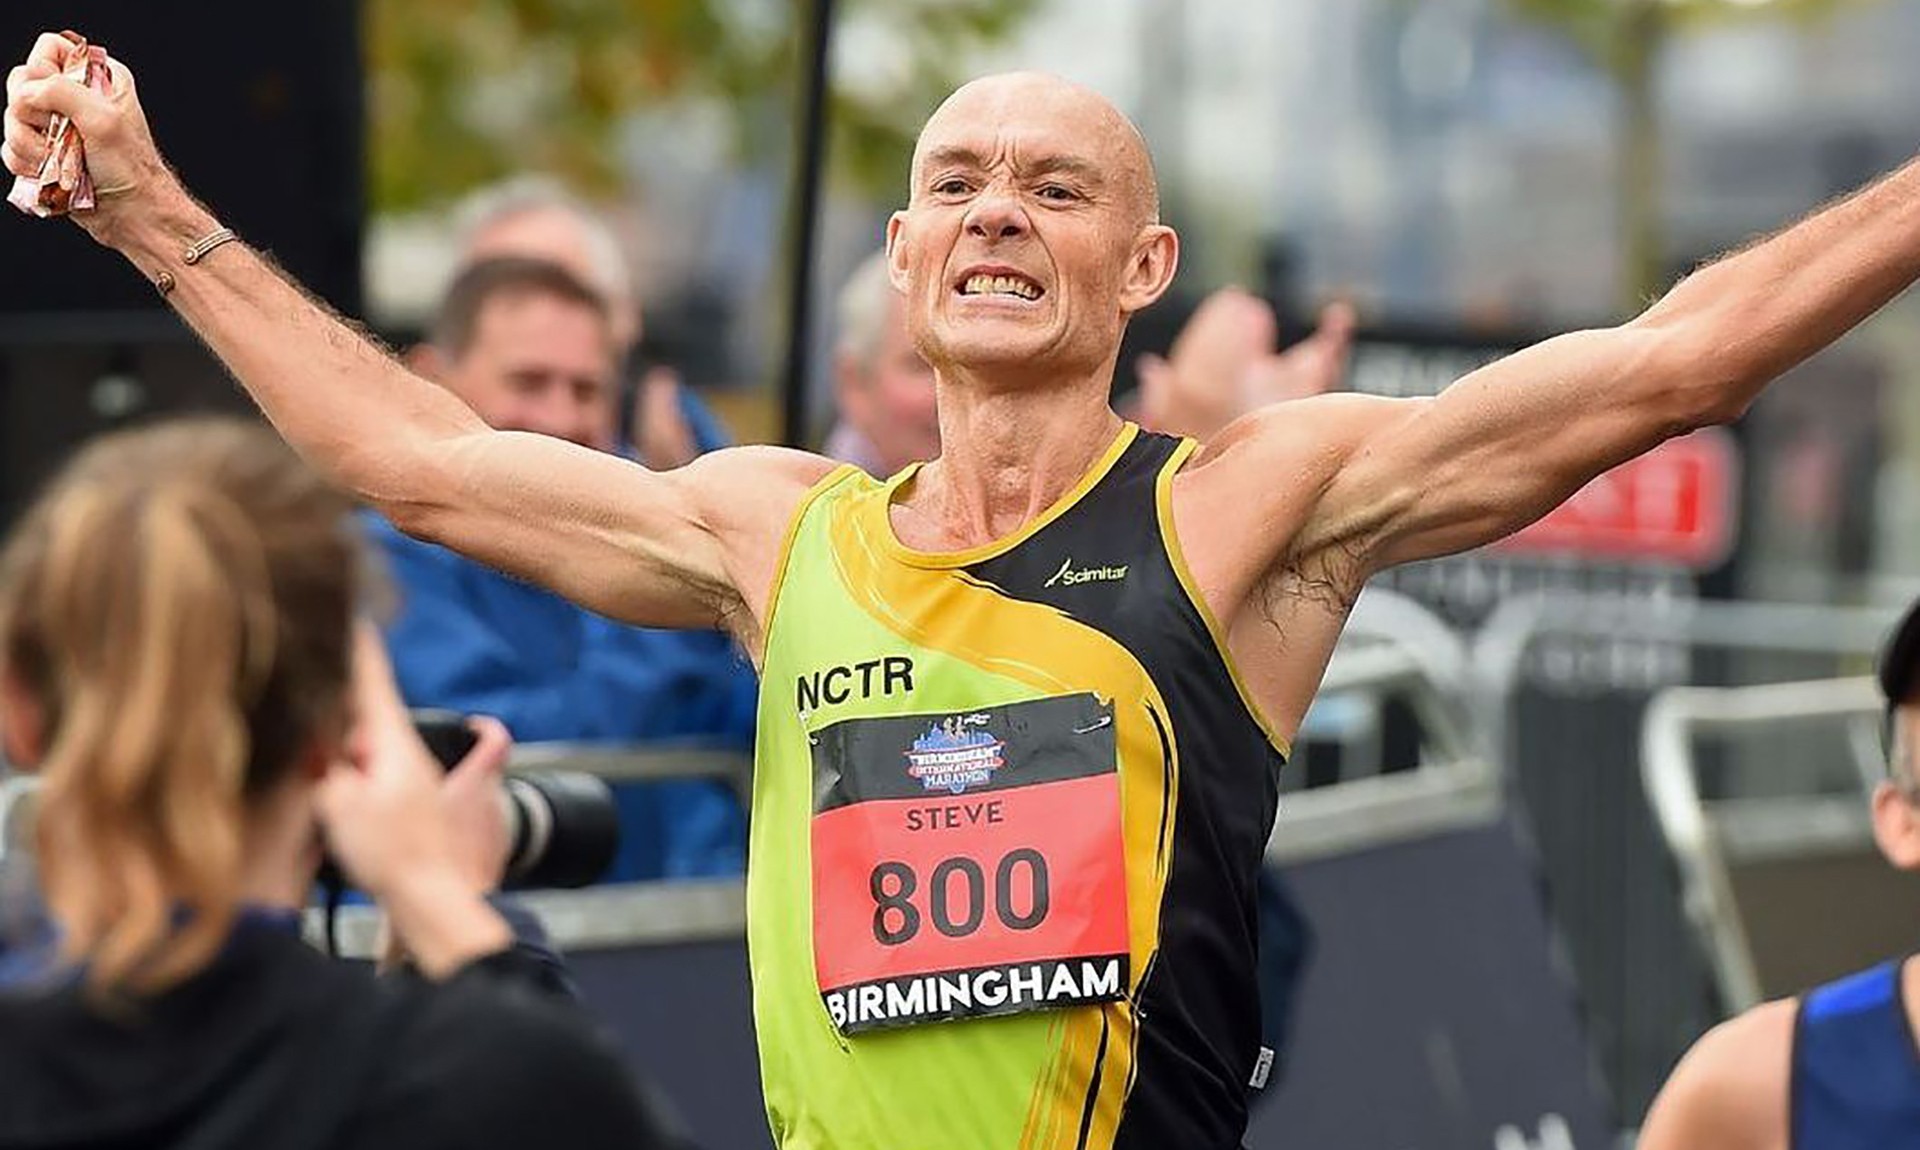 Known by many in the UK running community as ''The Godfather'', Steve has accomplished several world records and landmark achievements and is now on the cusp of achieving what is arguably the ultimate multi marathon record, 1000 official marathons in the fastest average finish time.